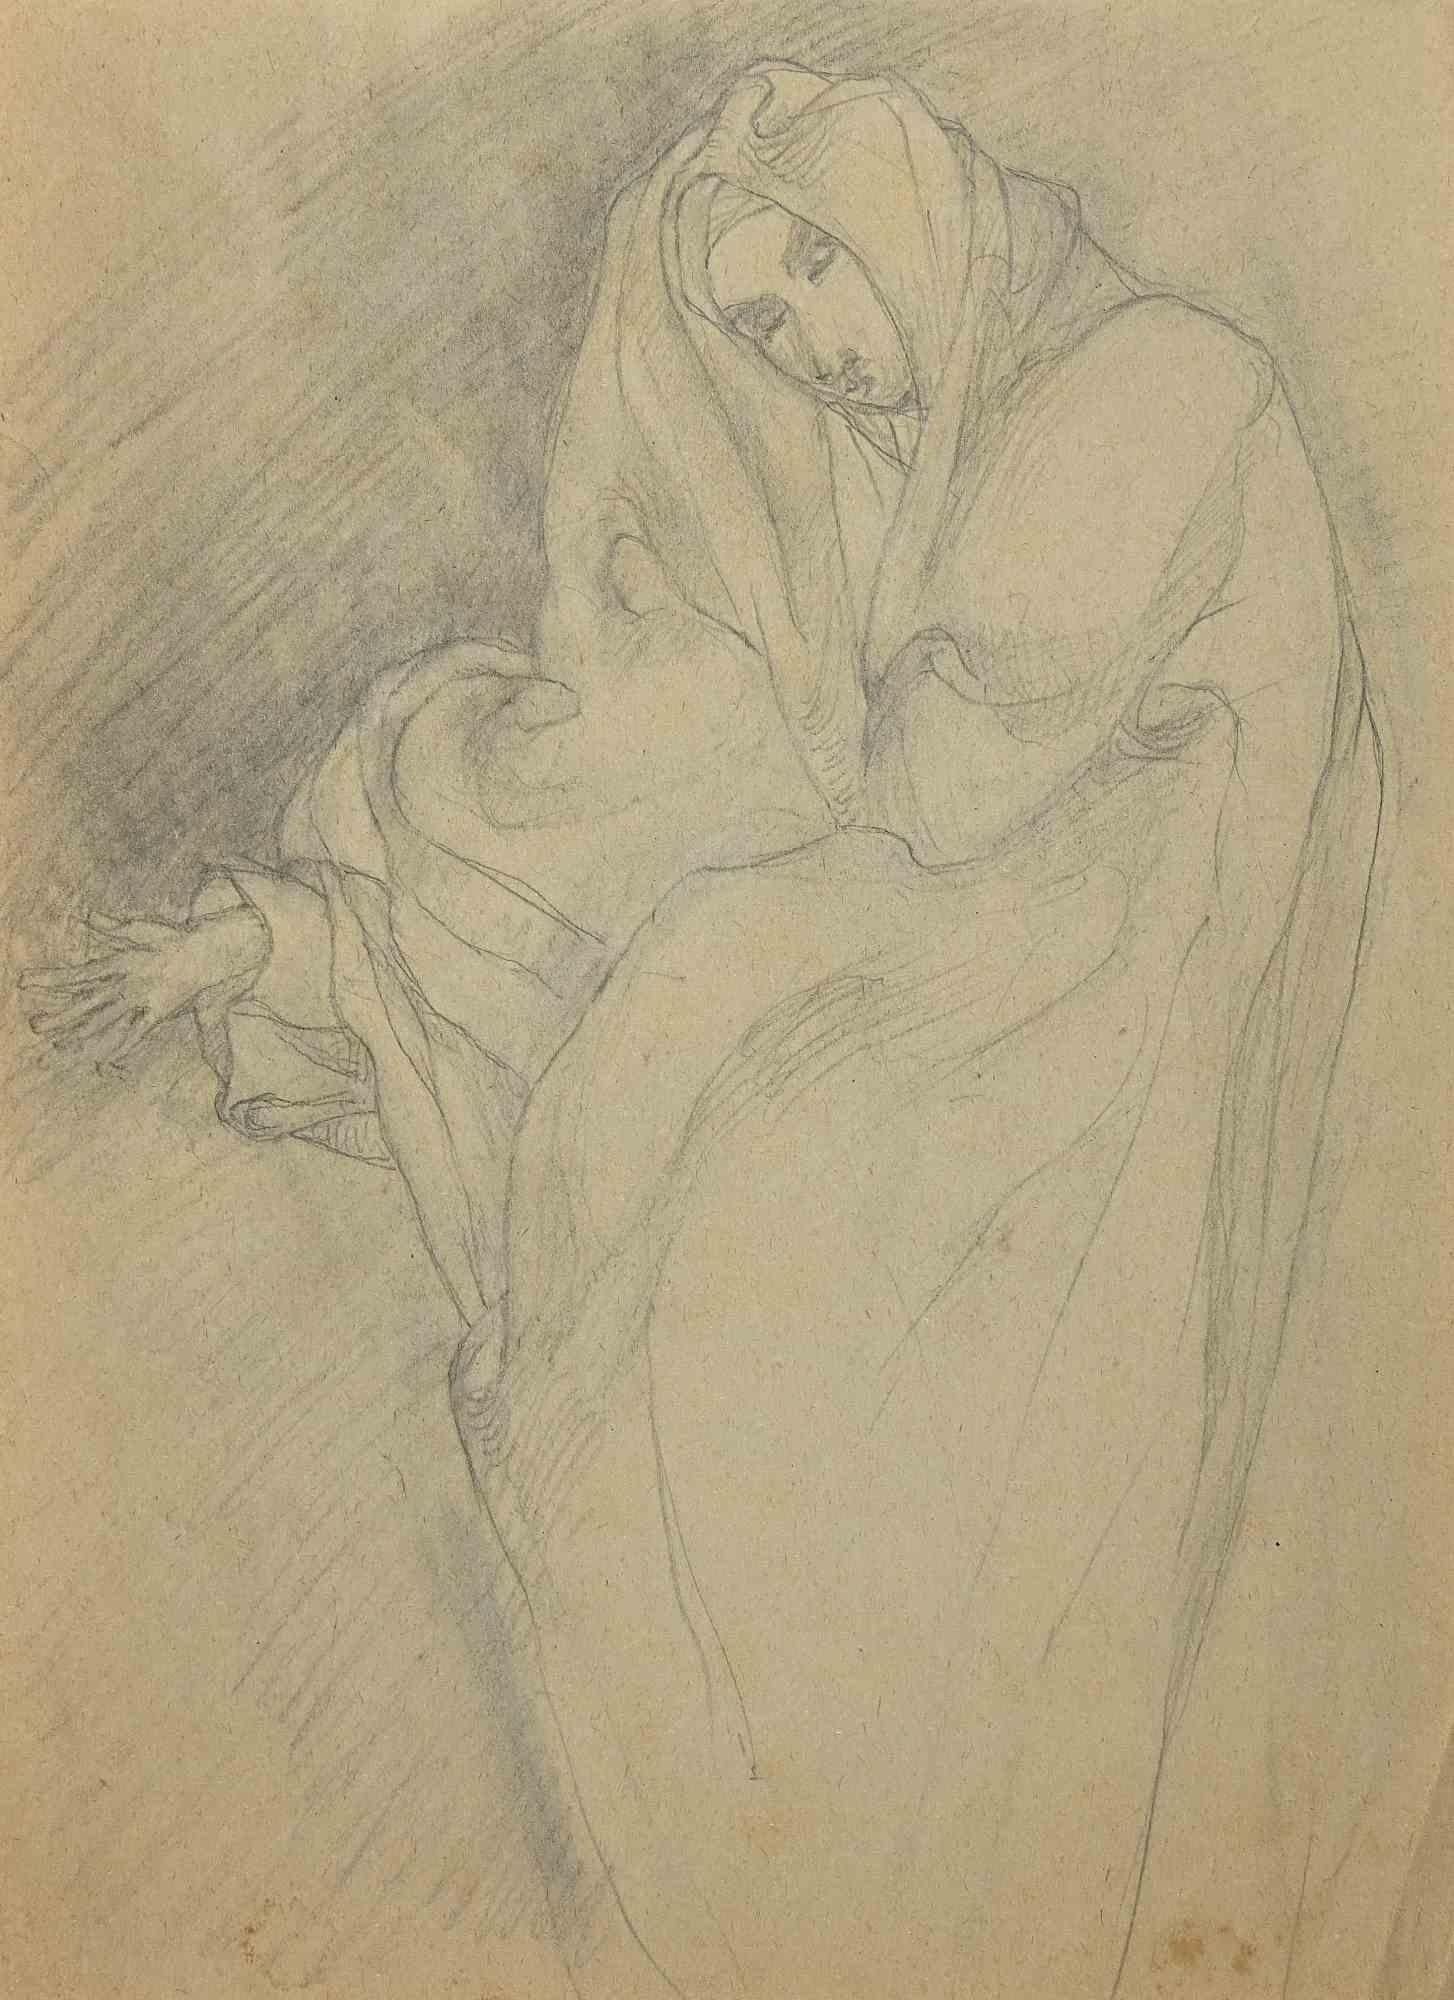 Unknown Figurative Art - Woman in the Wind - Original Pencil on Paper - Early 20th Century